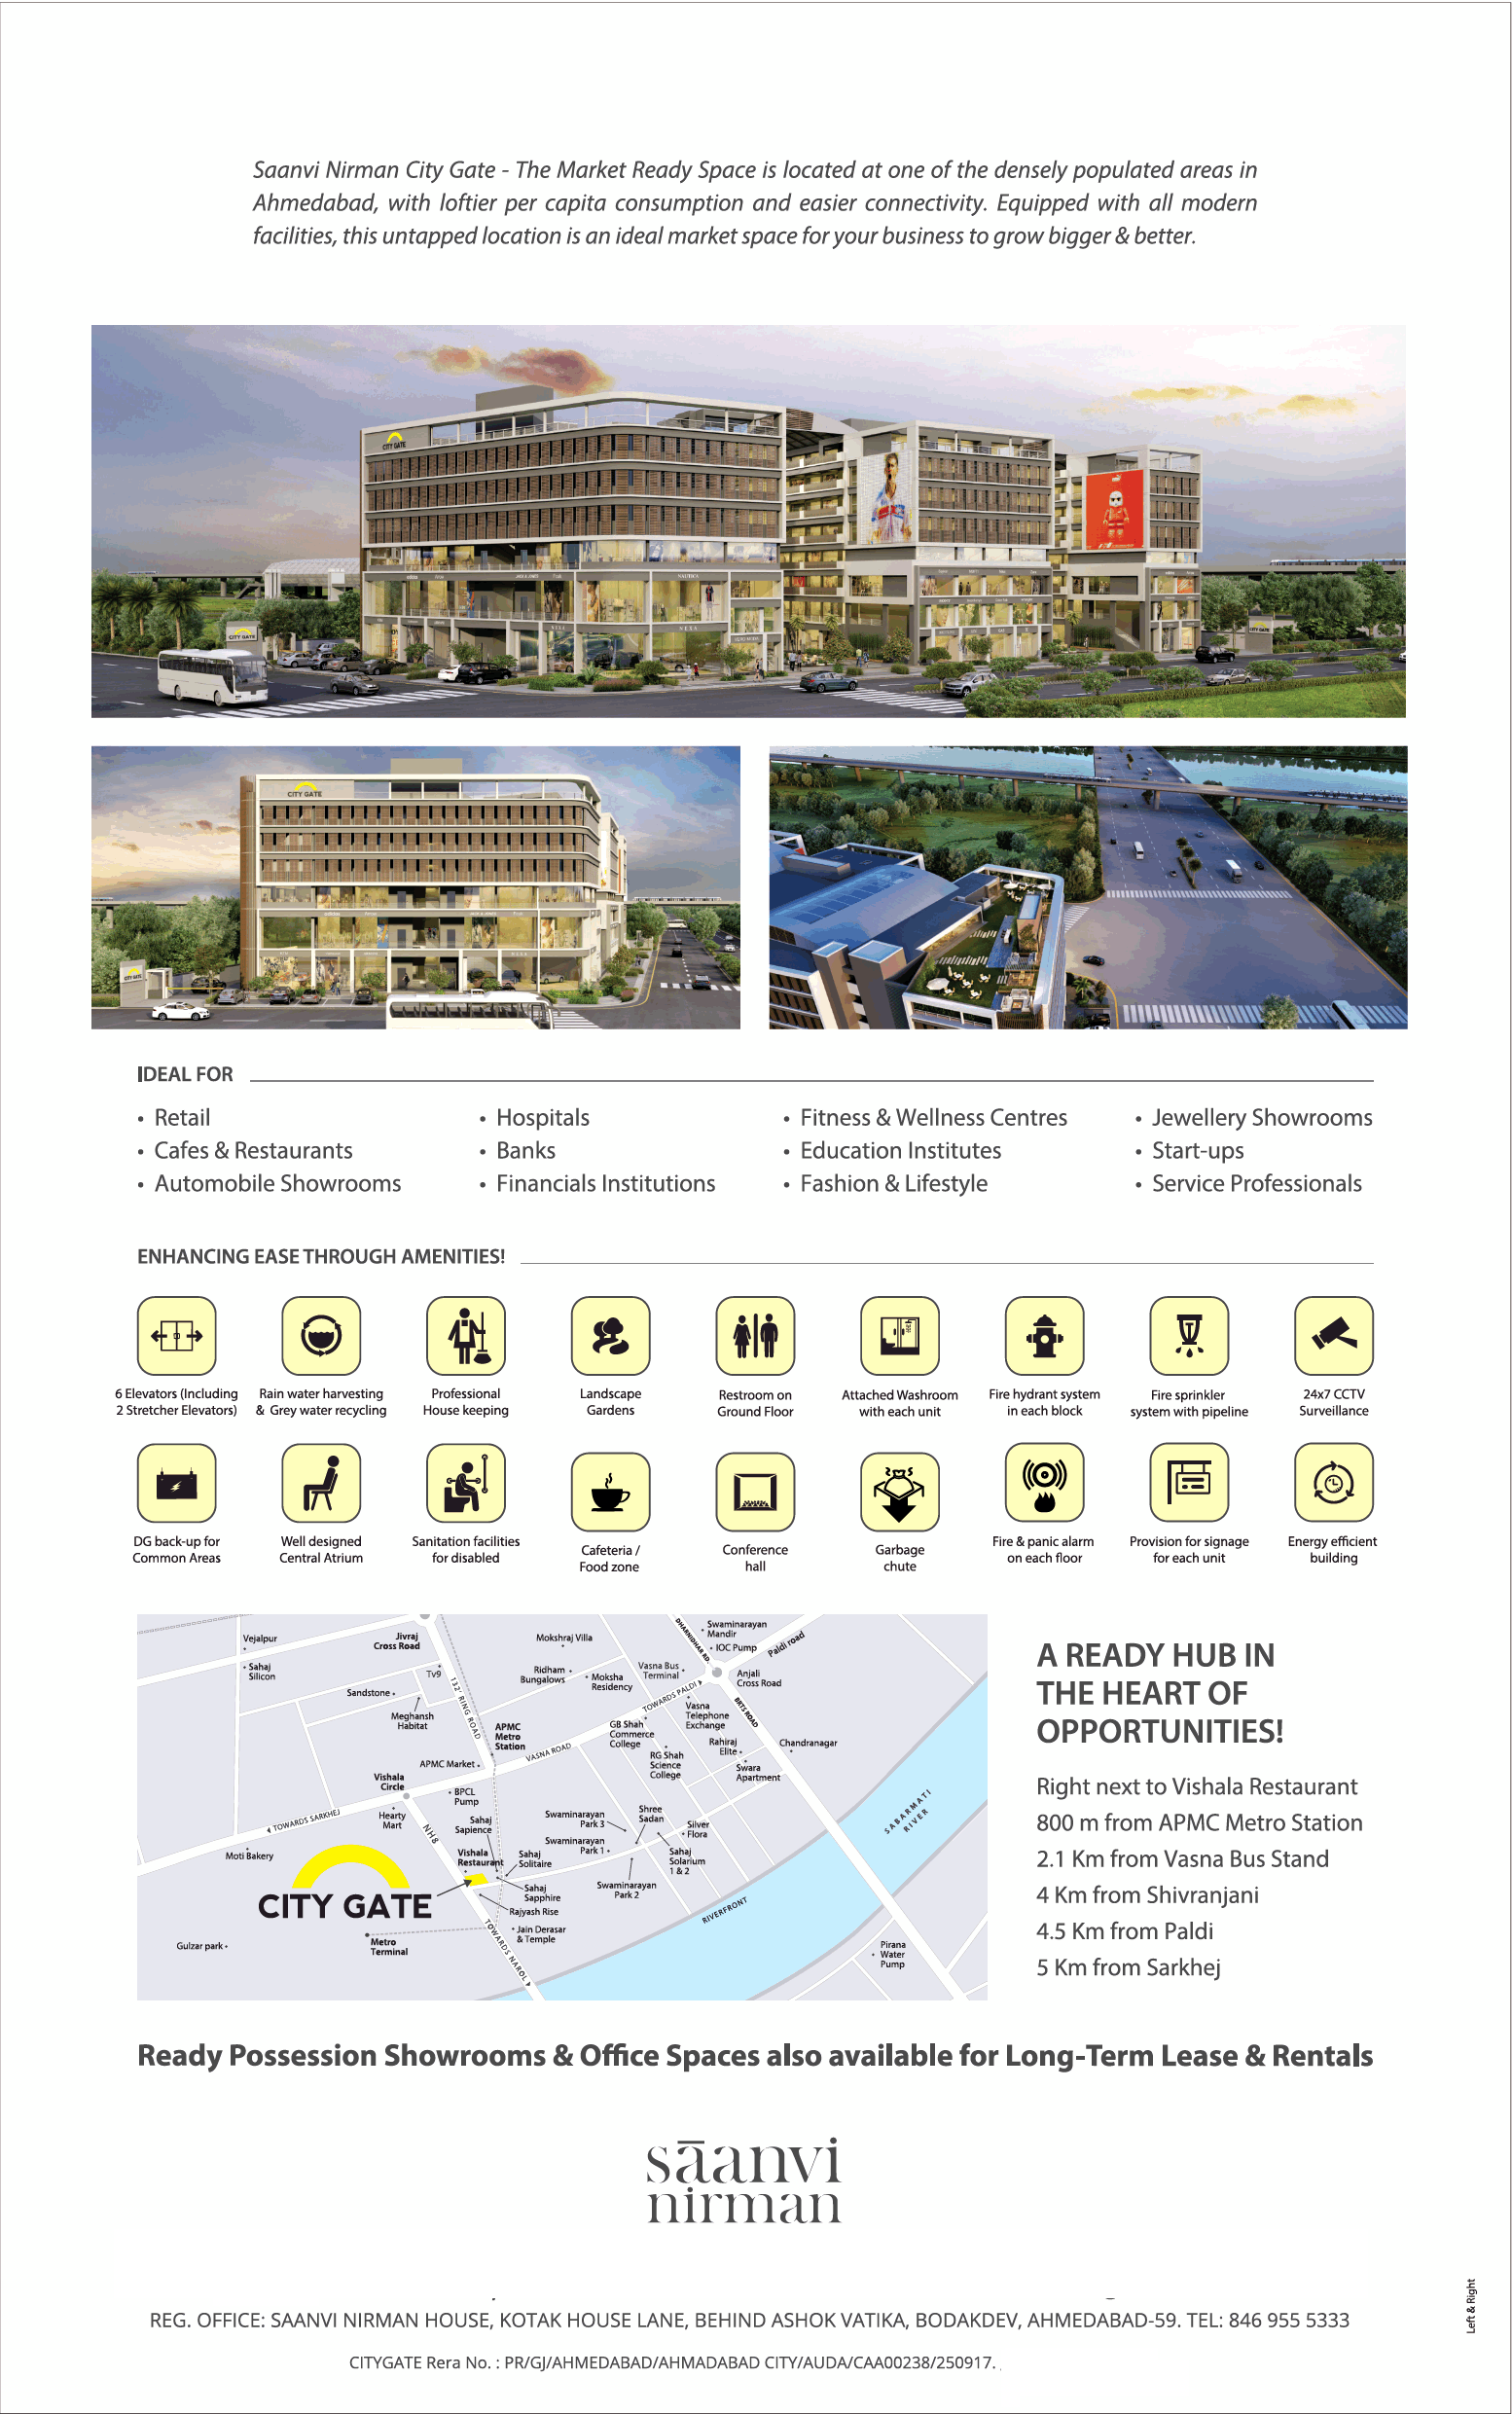 Ready Possession Showrooms & Office Spaces at Saanvi Nirman City Gate, Ahmedabad Update